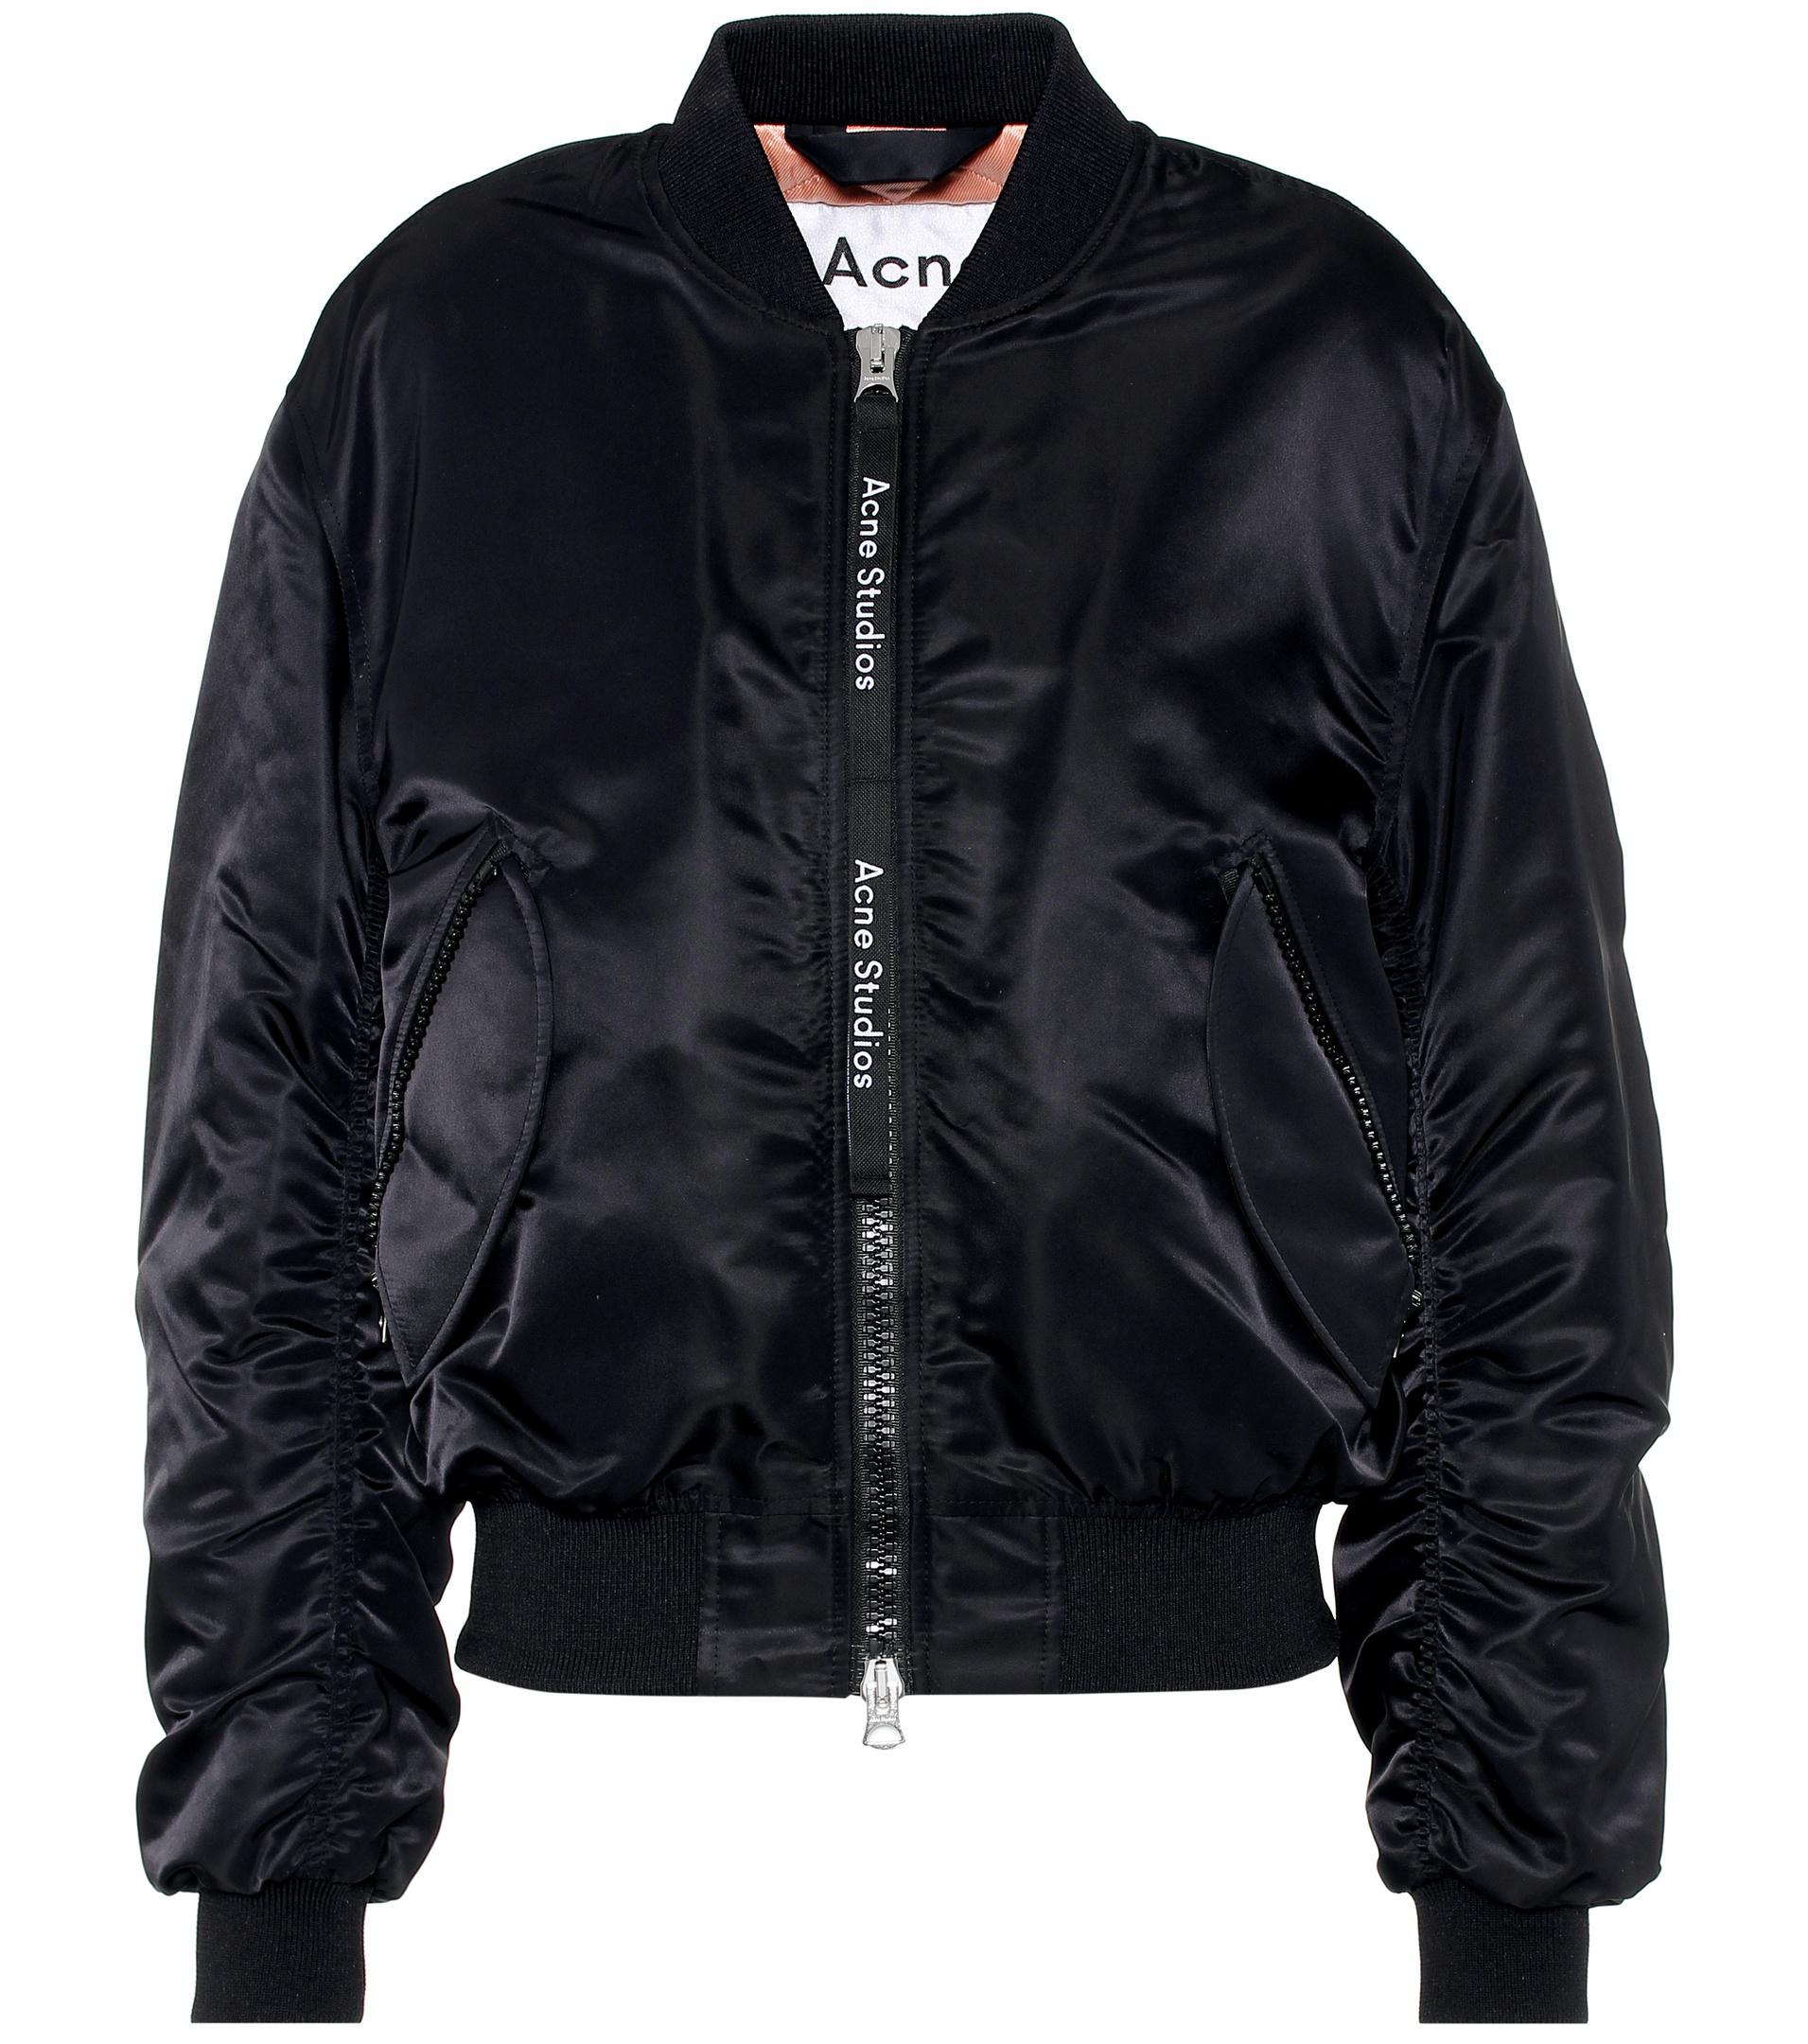 Lyst - Acne Clea Bomber Jacket in Black